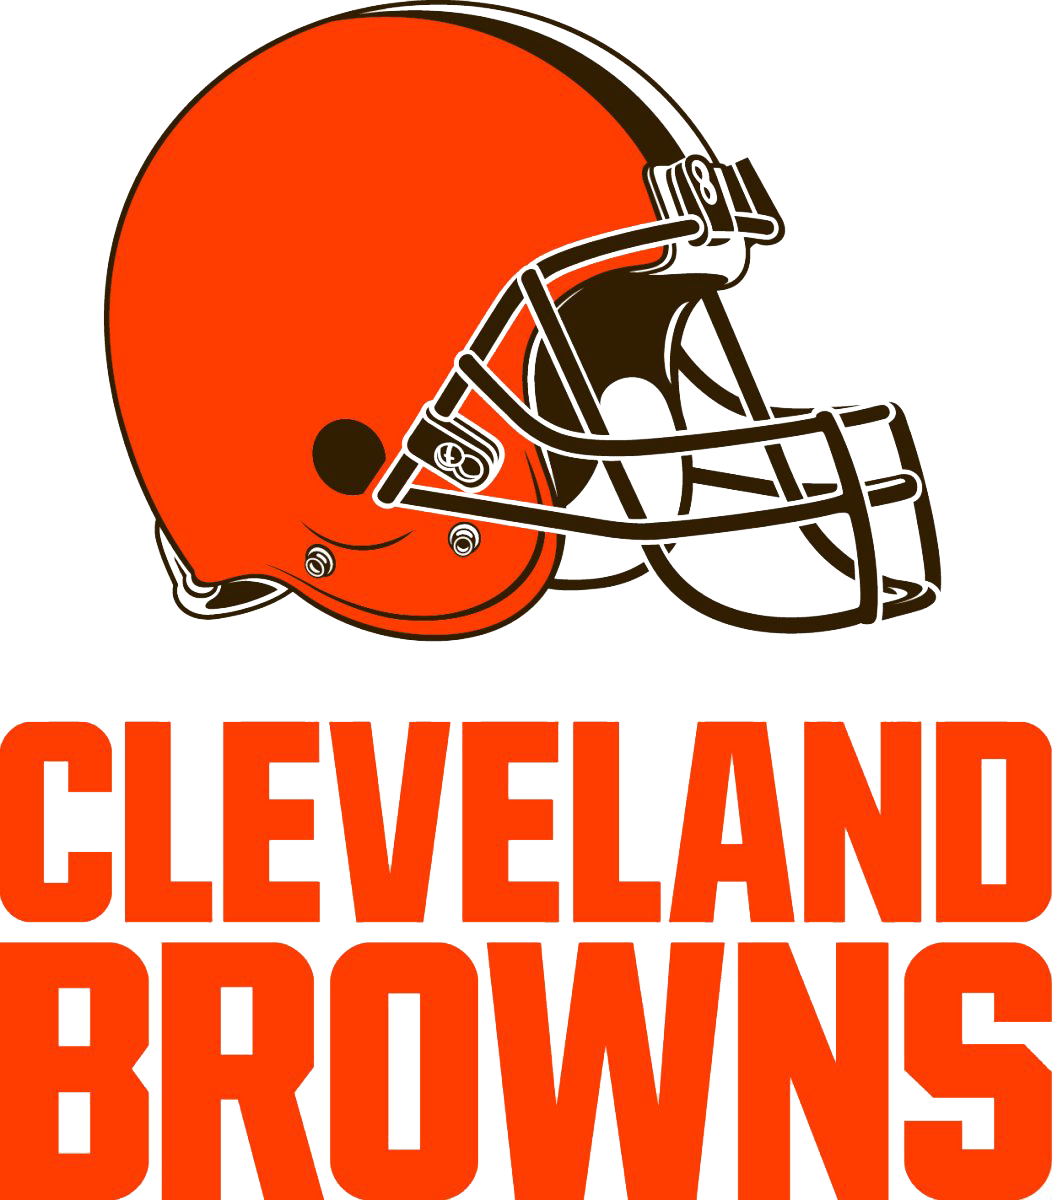 File:Cleveland Browns (c. 200